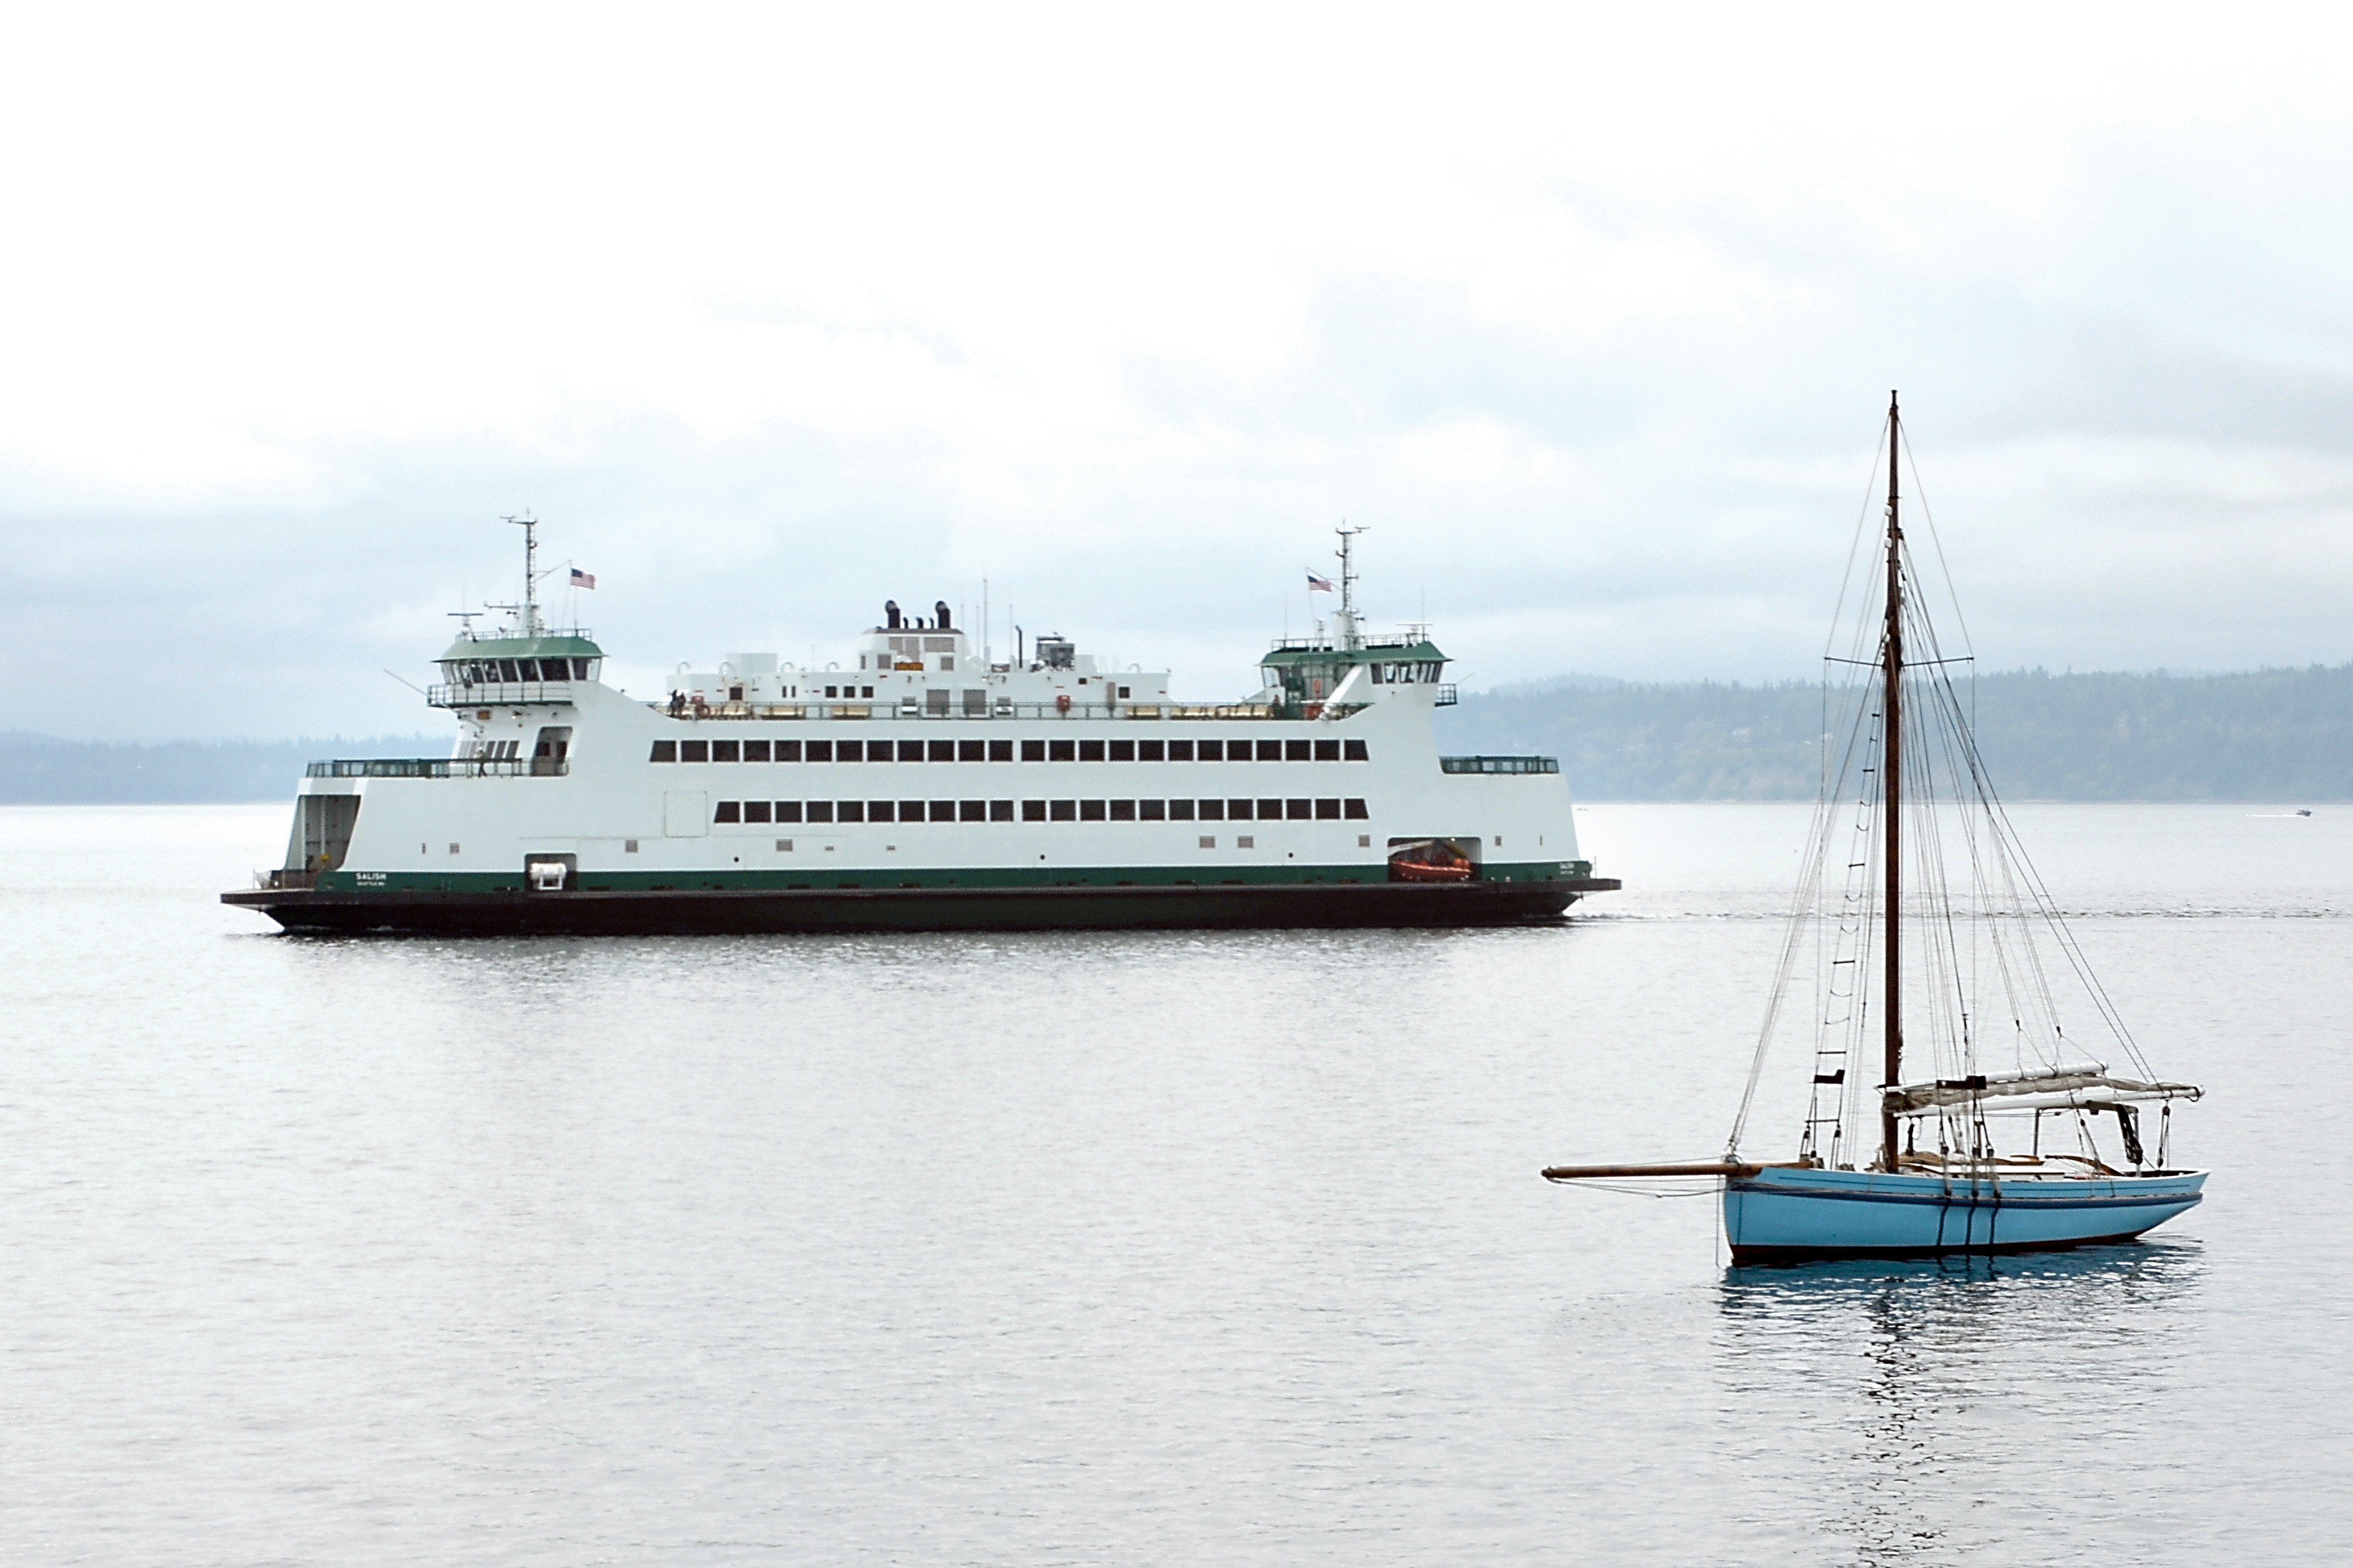 The MV Salish is carrying a monitoring device that is expected to gather data about Puget Sound. Charlie Bermant/Peninsula Daily News